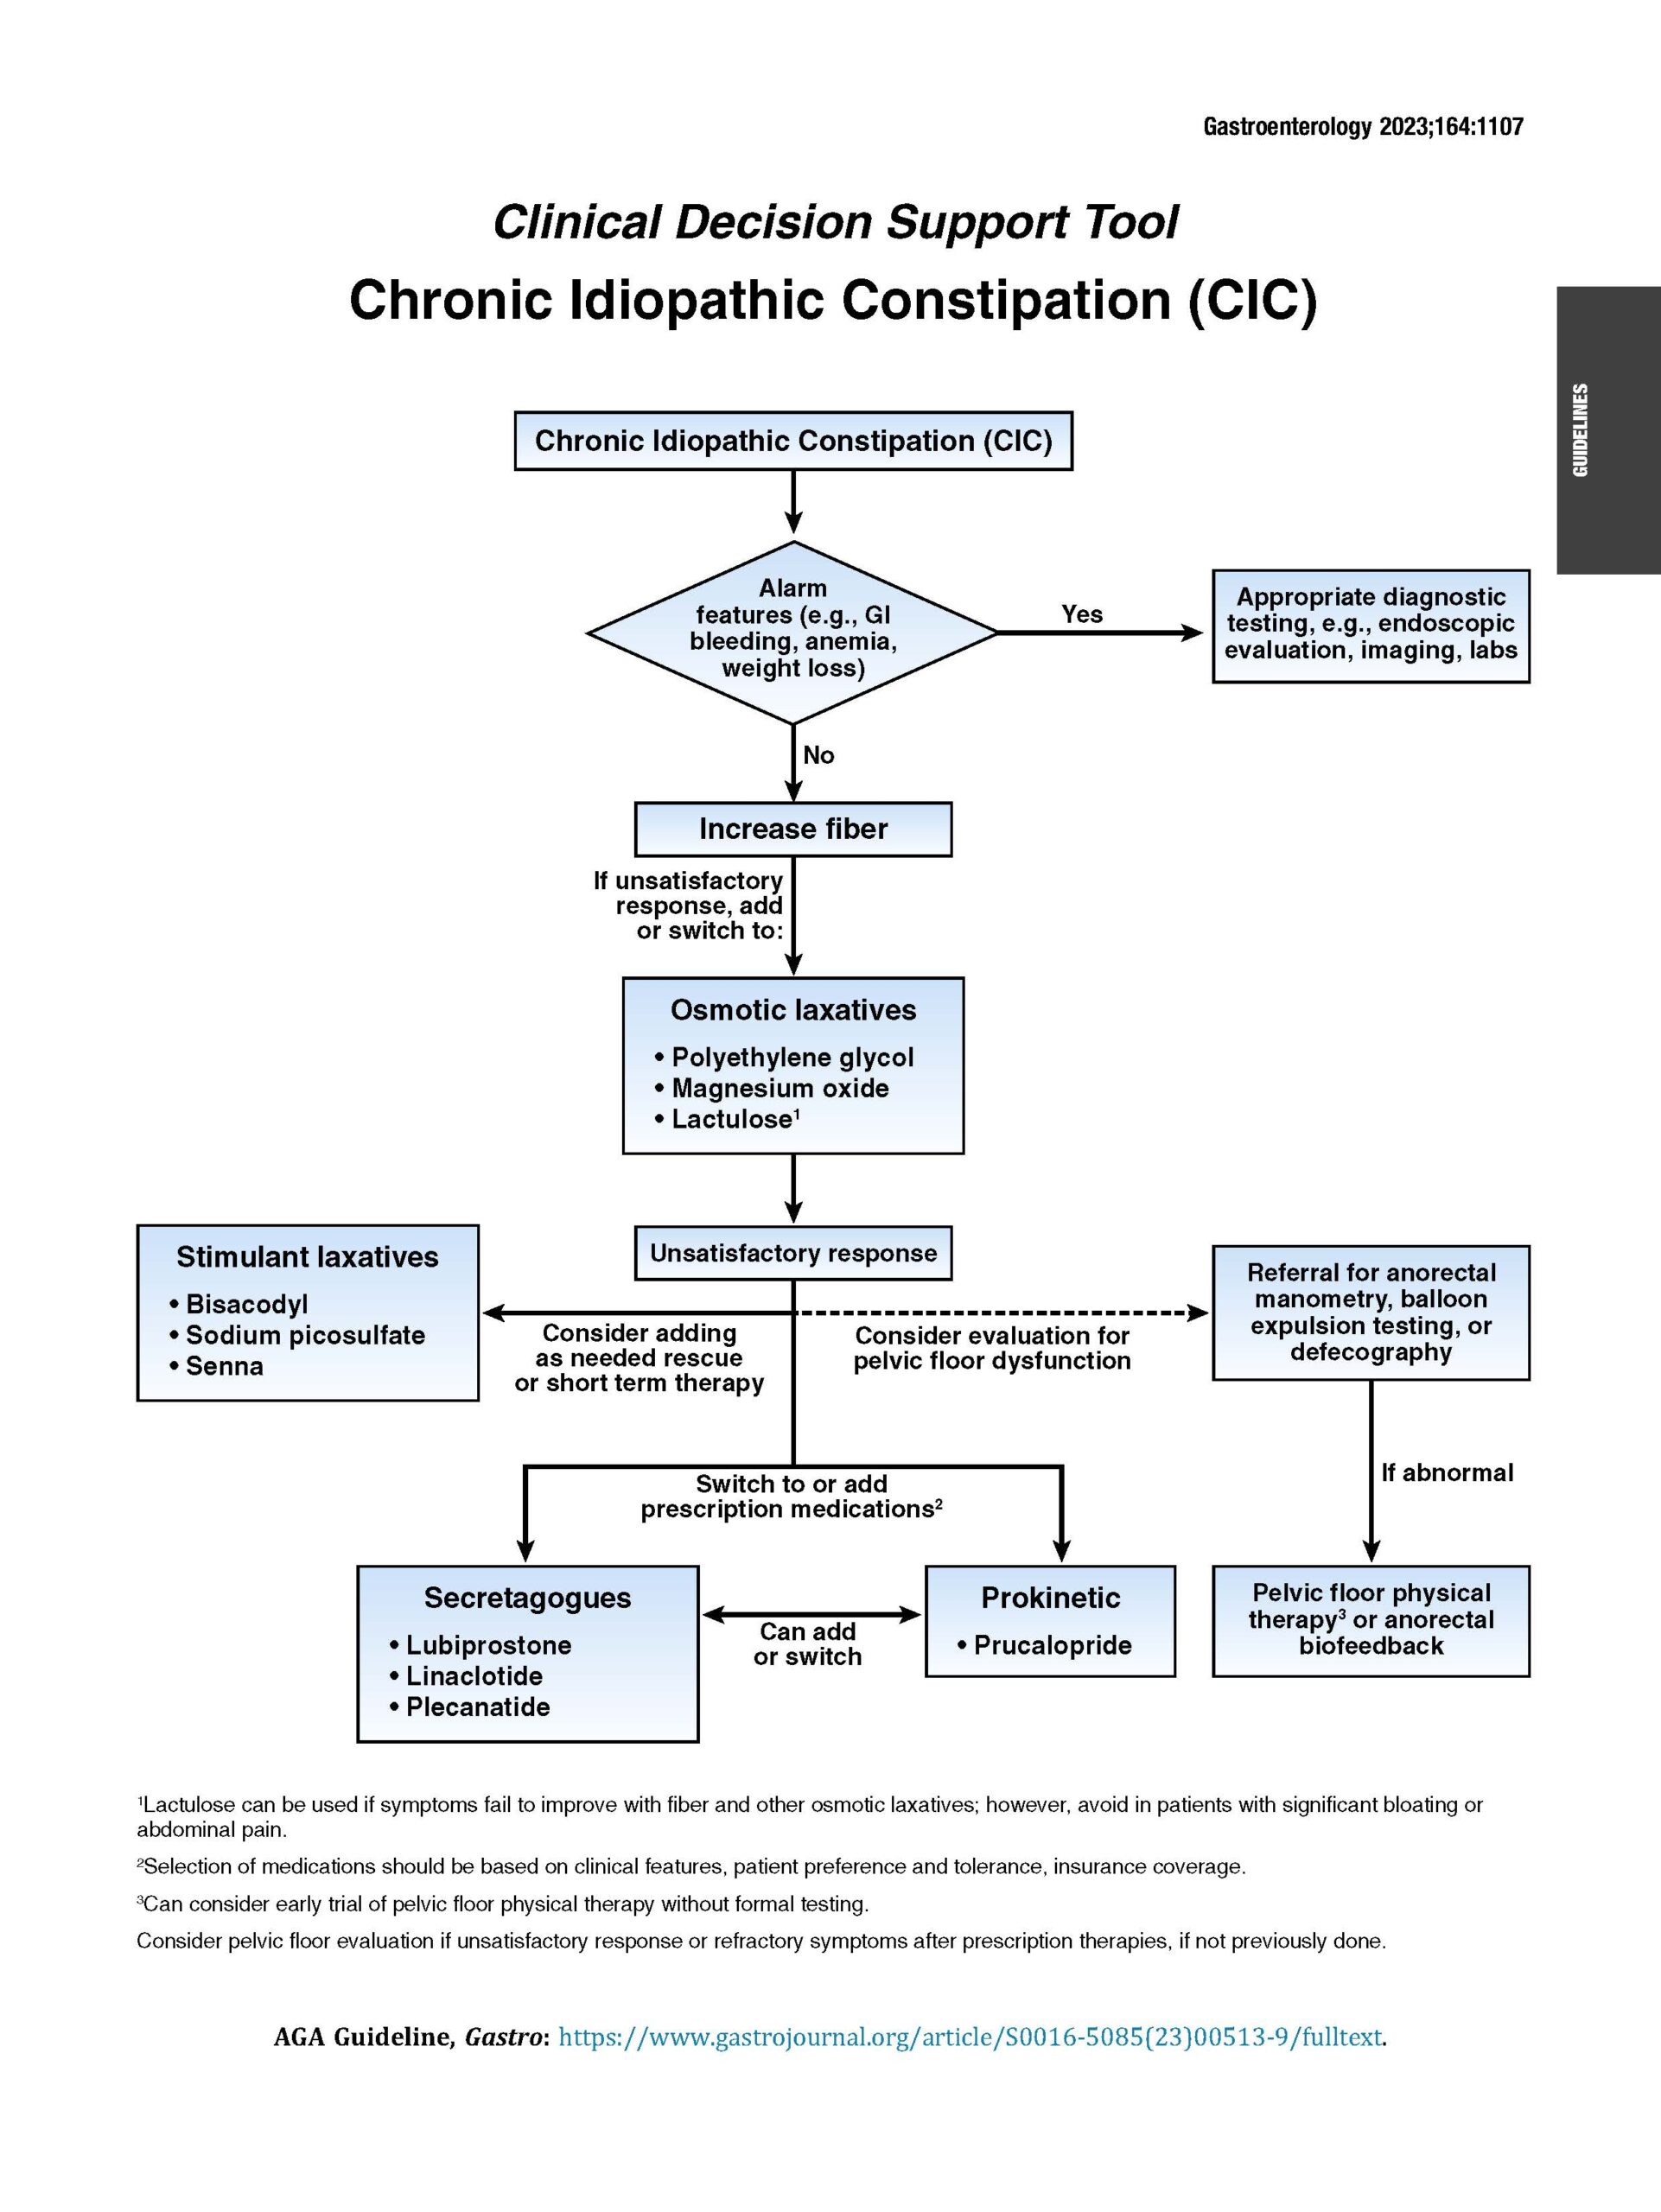 Clinical Decision Support Tool: Chronic Idiopathic Constipation (CIC)